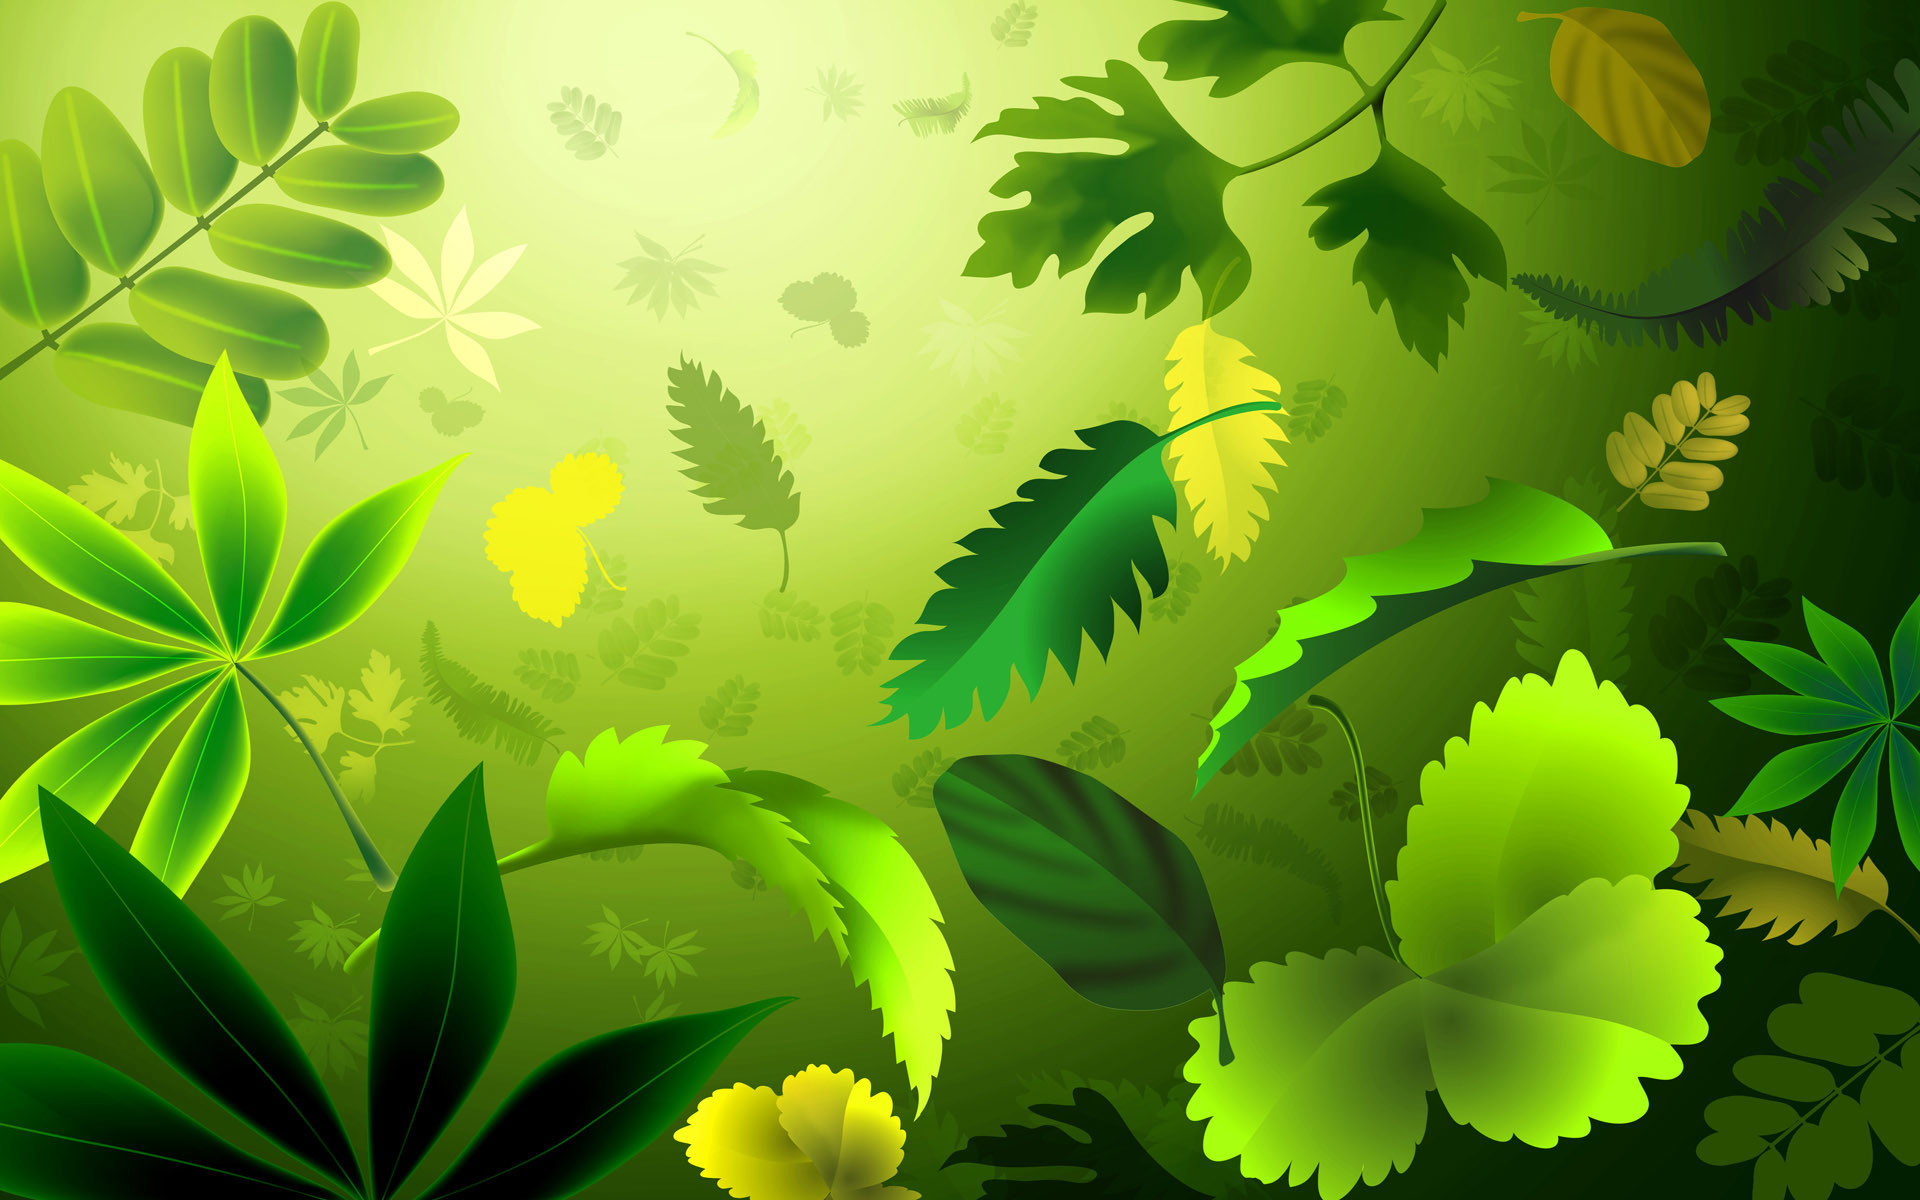 1920x1200 green leaves hd wallpaper download cool images download high definition background  wallpapers colourful desktop wallpapers widescreen digital photos ...